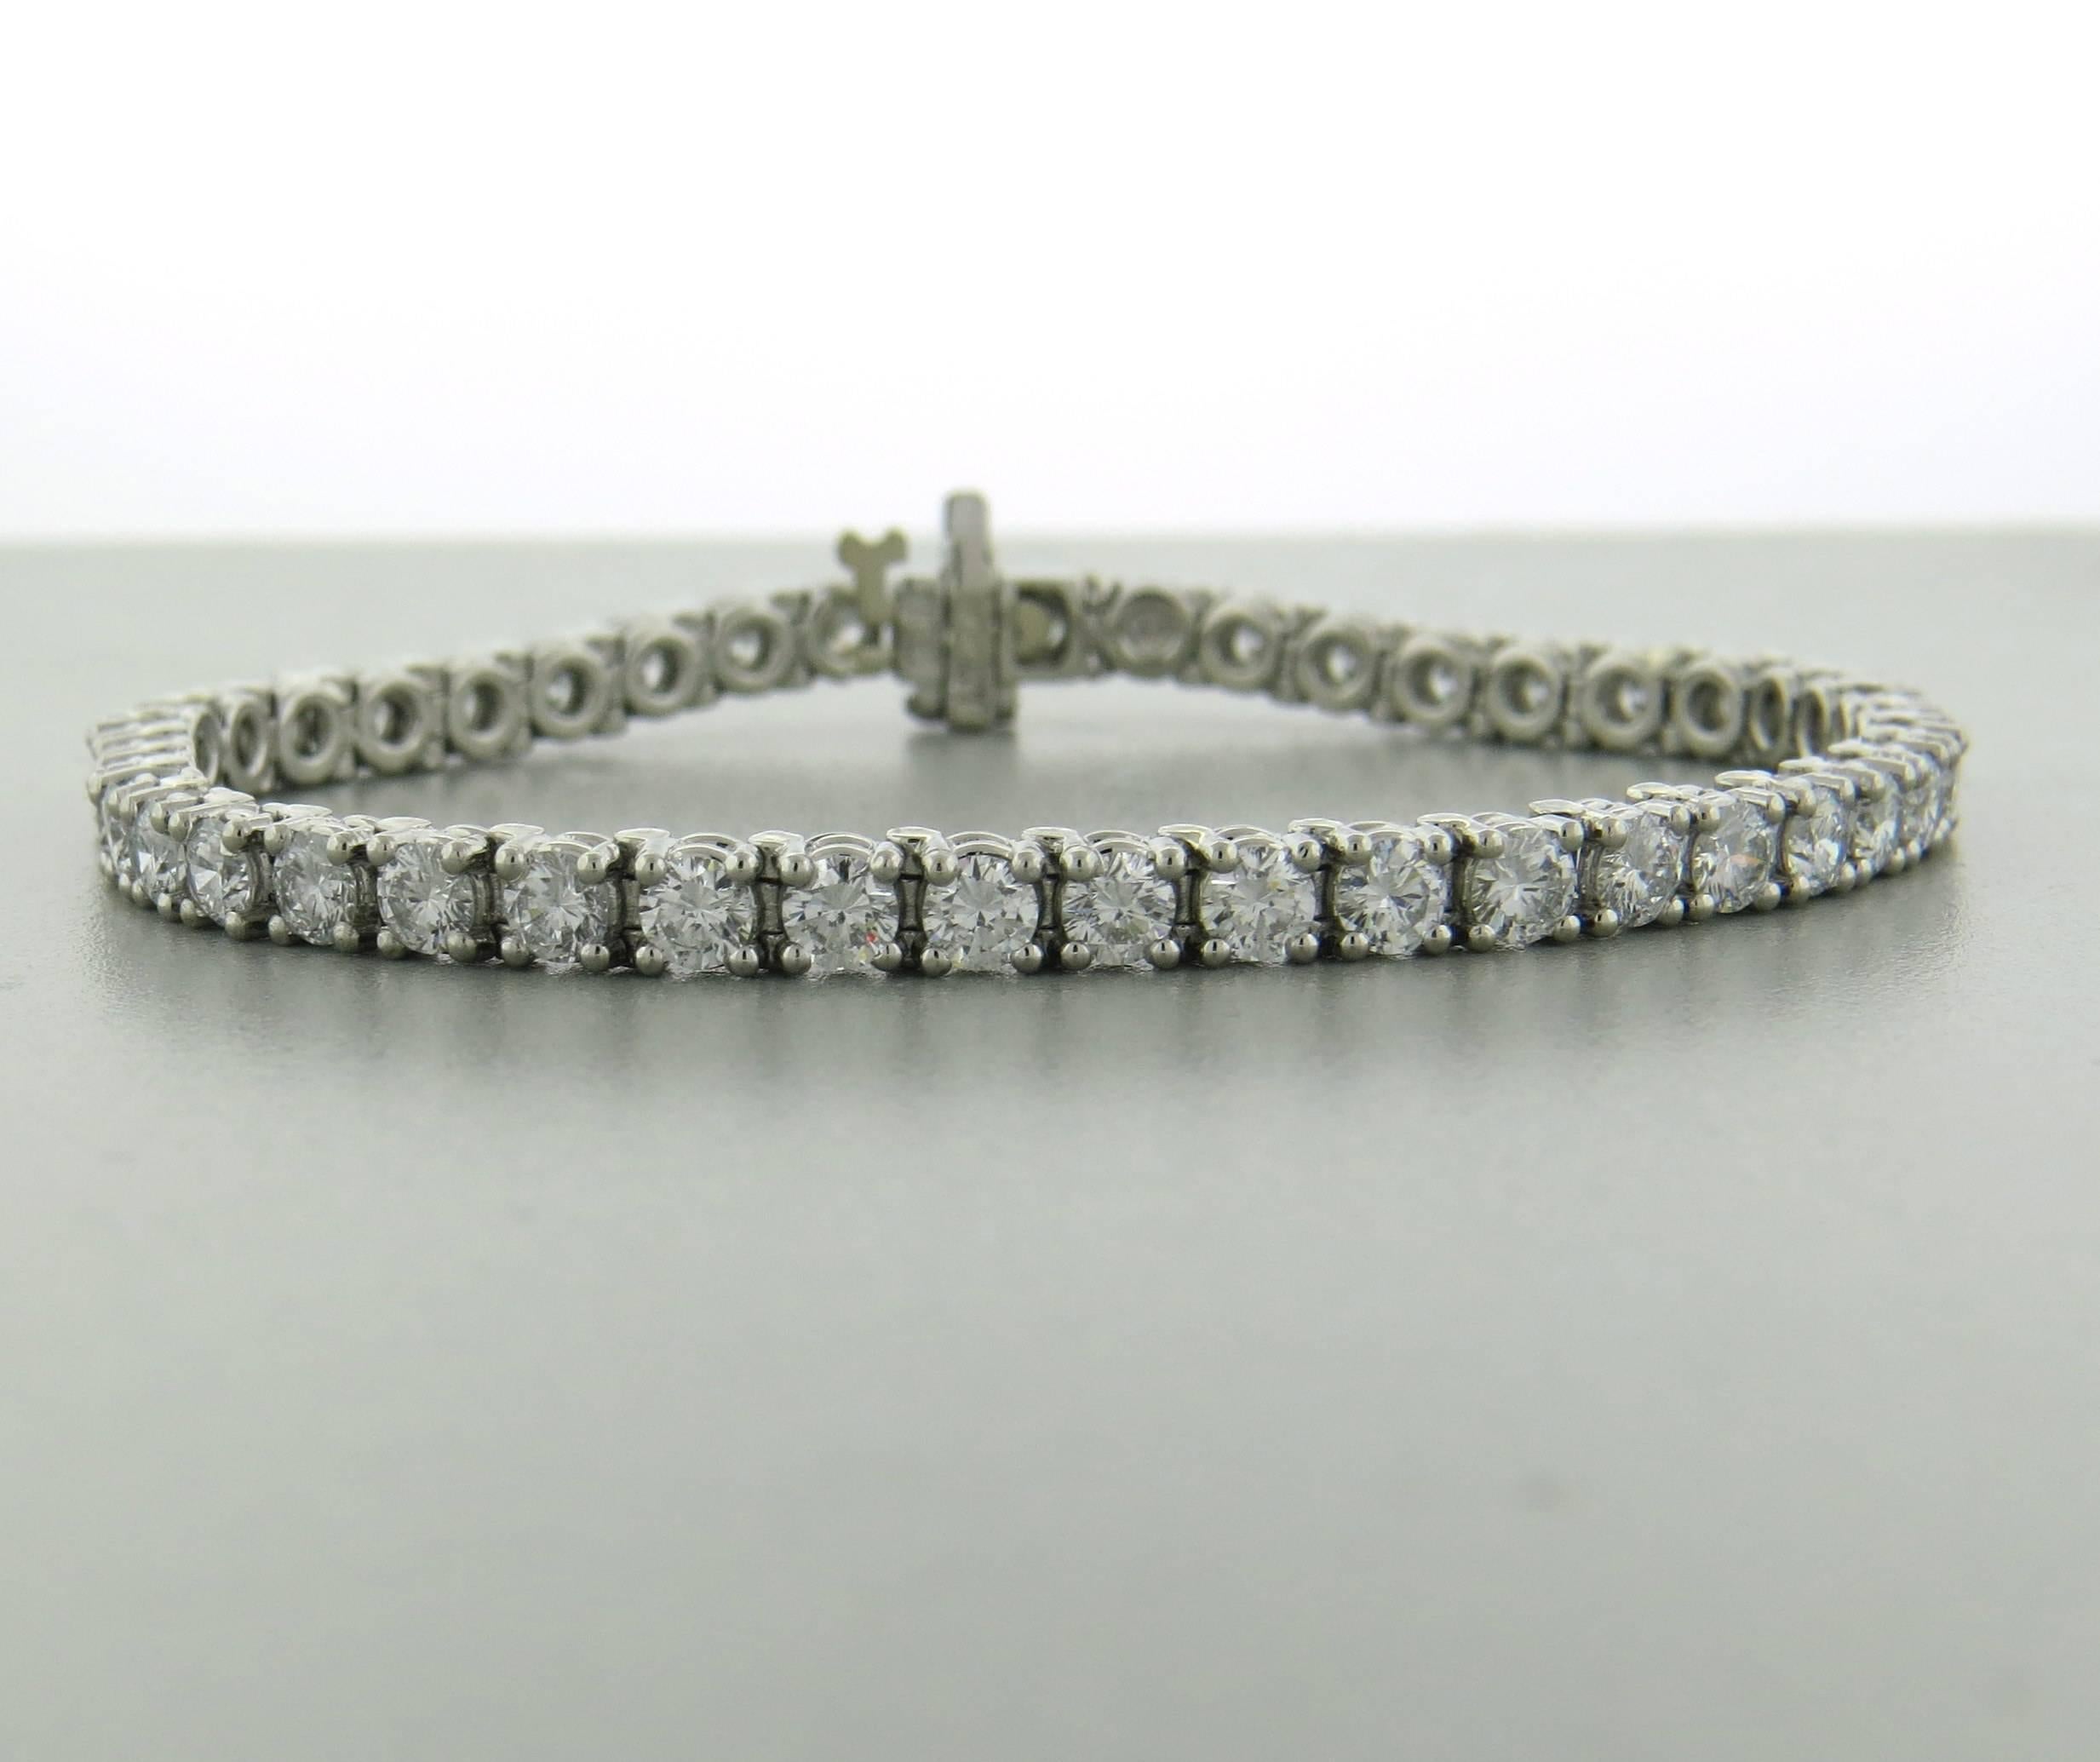 Platinum tennis bracelet, set with approximately 7 carats in VS1-SI1/H diamonds. Bracelet is 7 1/4" long and 4.2mm wide. Weight of the piece - 26.5 grams